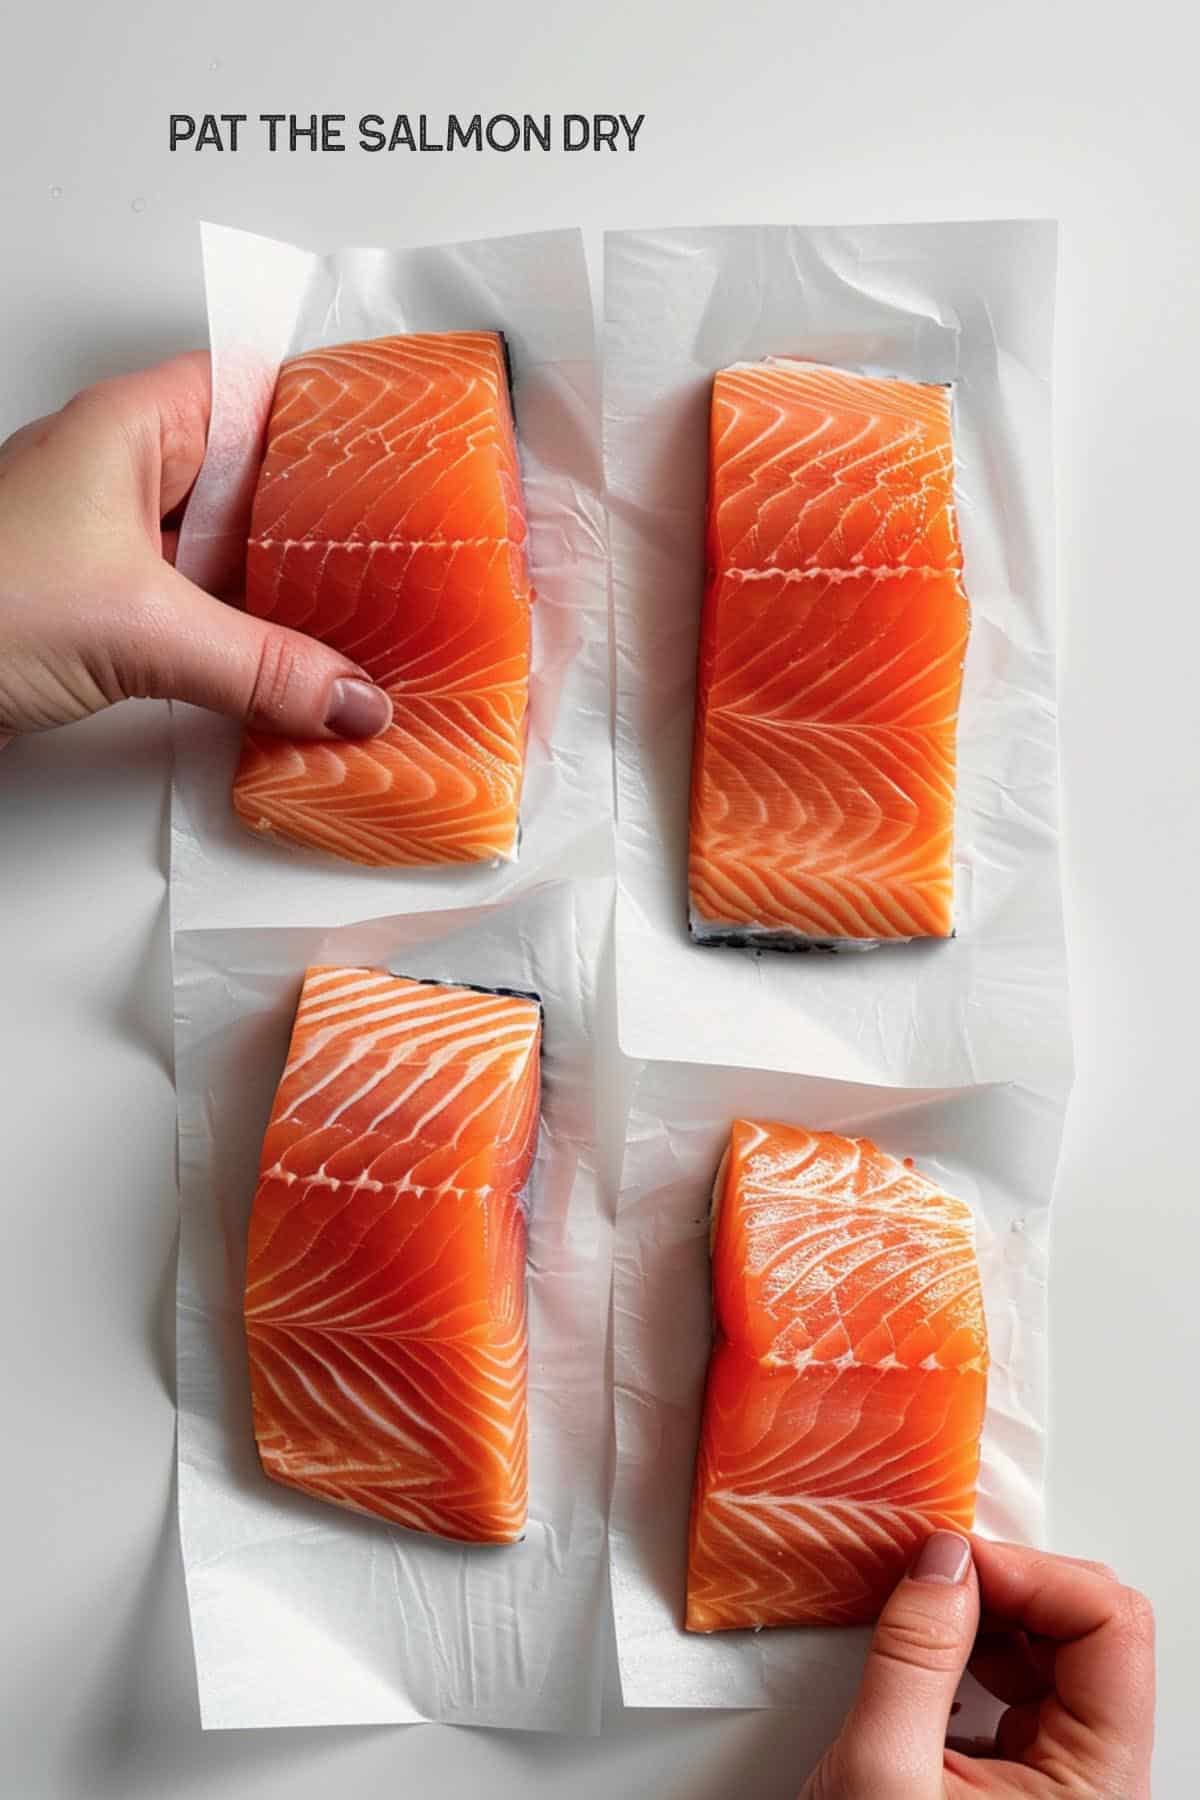 Pat the Salmon dry with paper towel